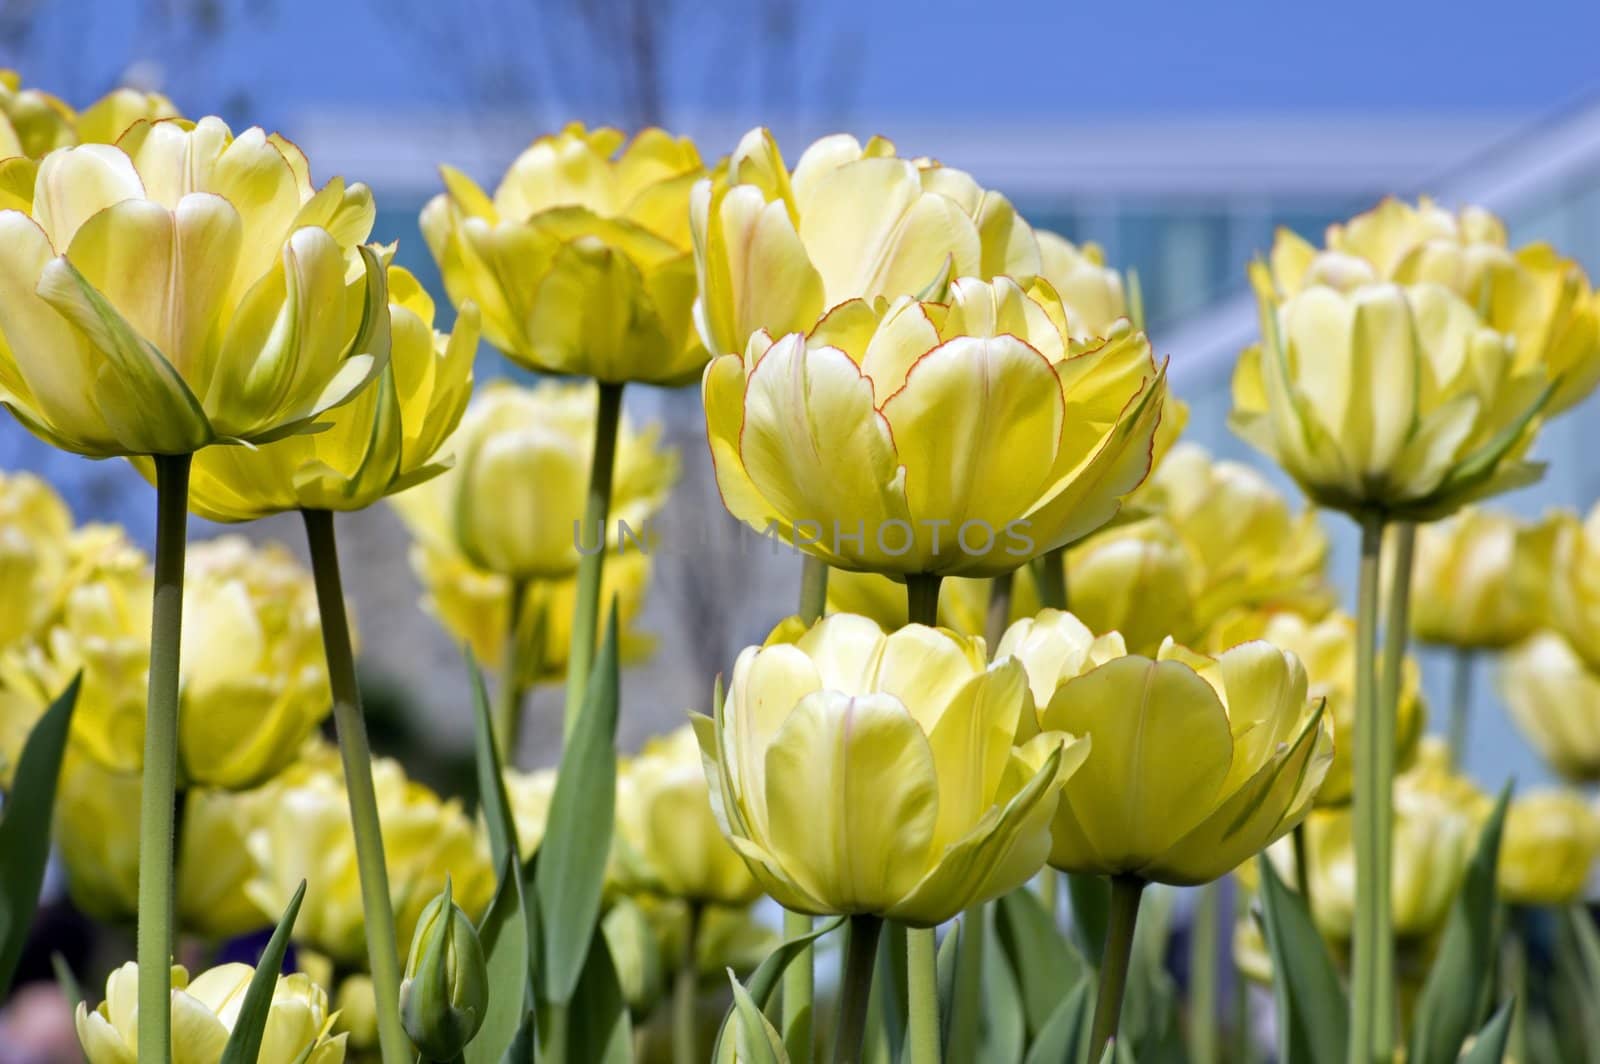 Yellow tulips by PavelS